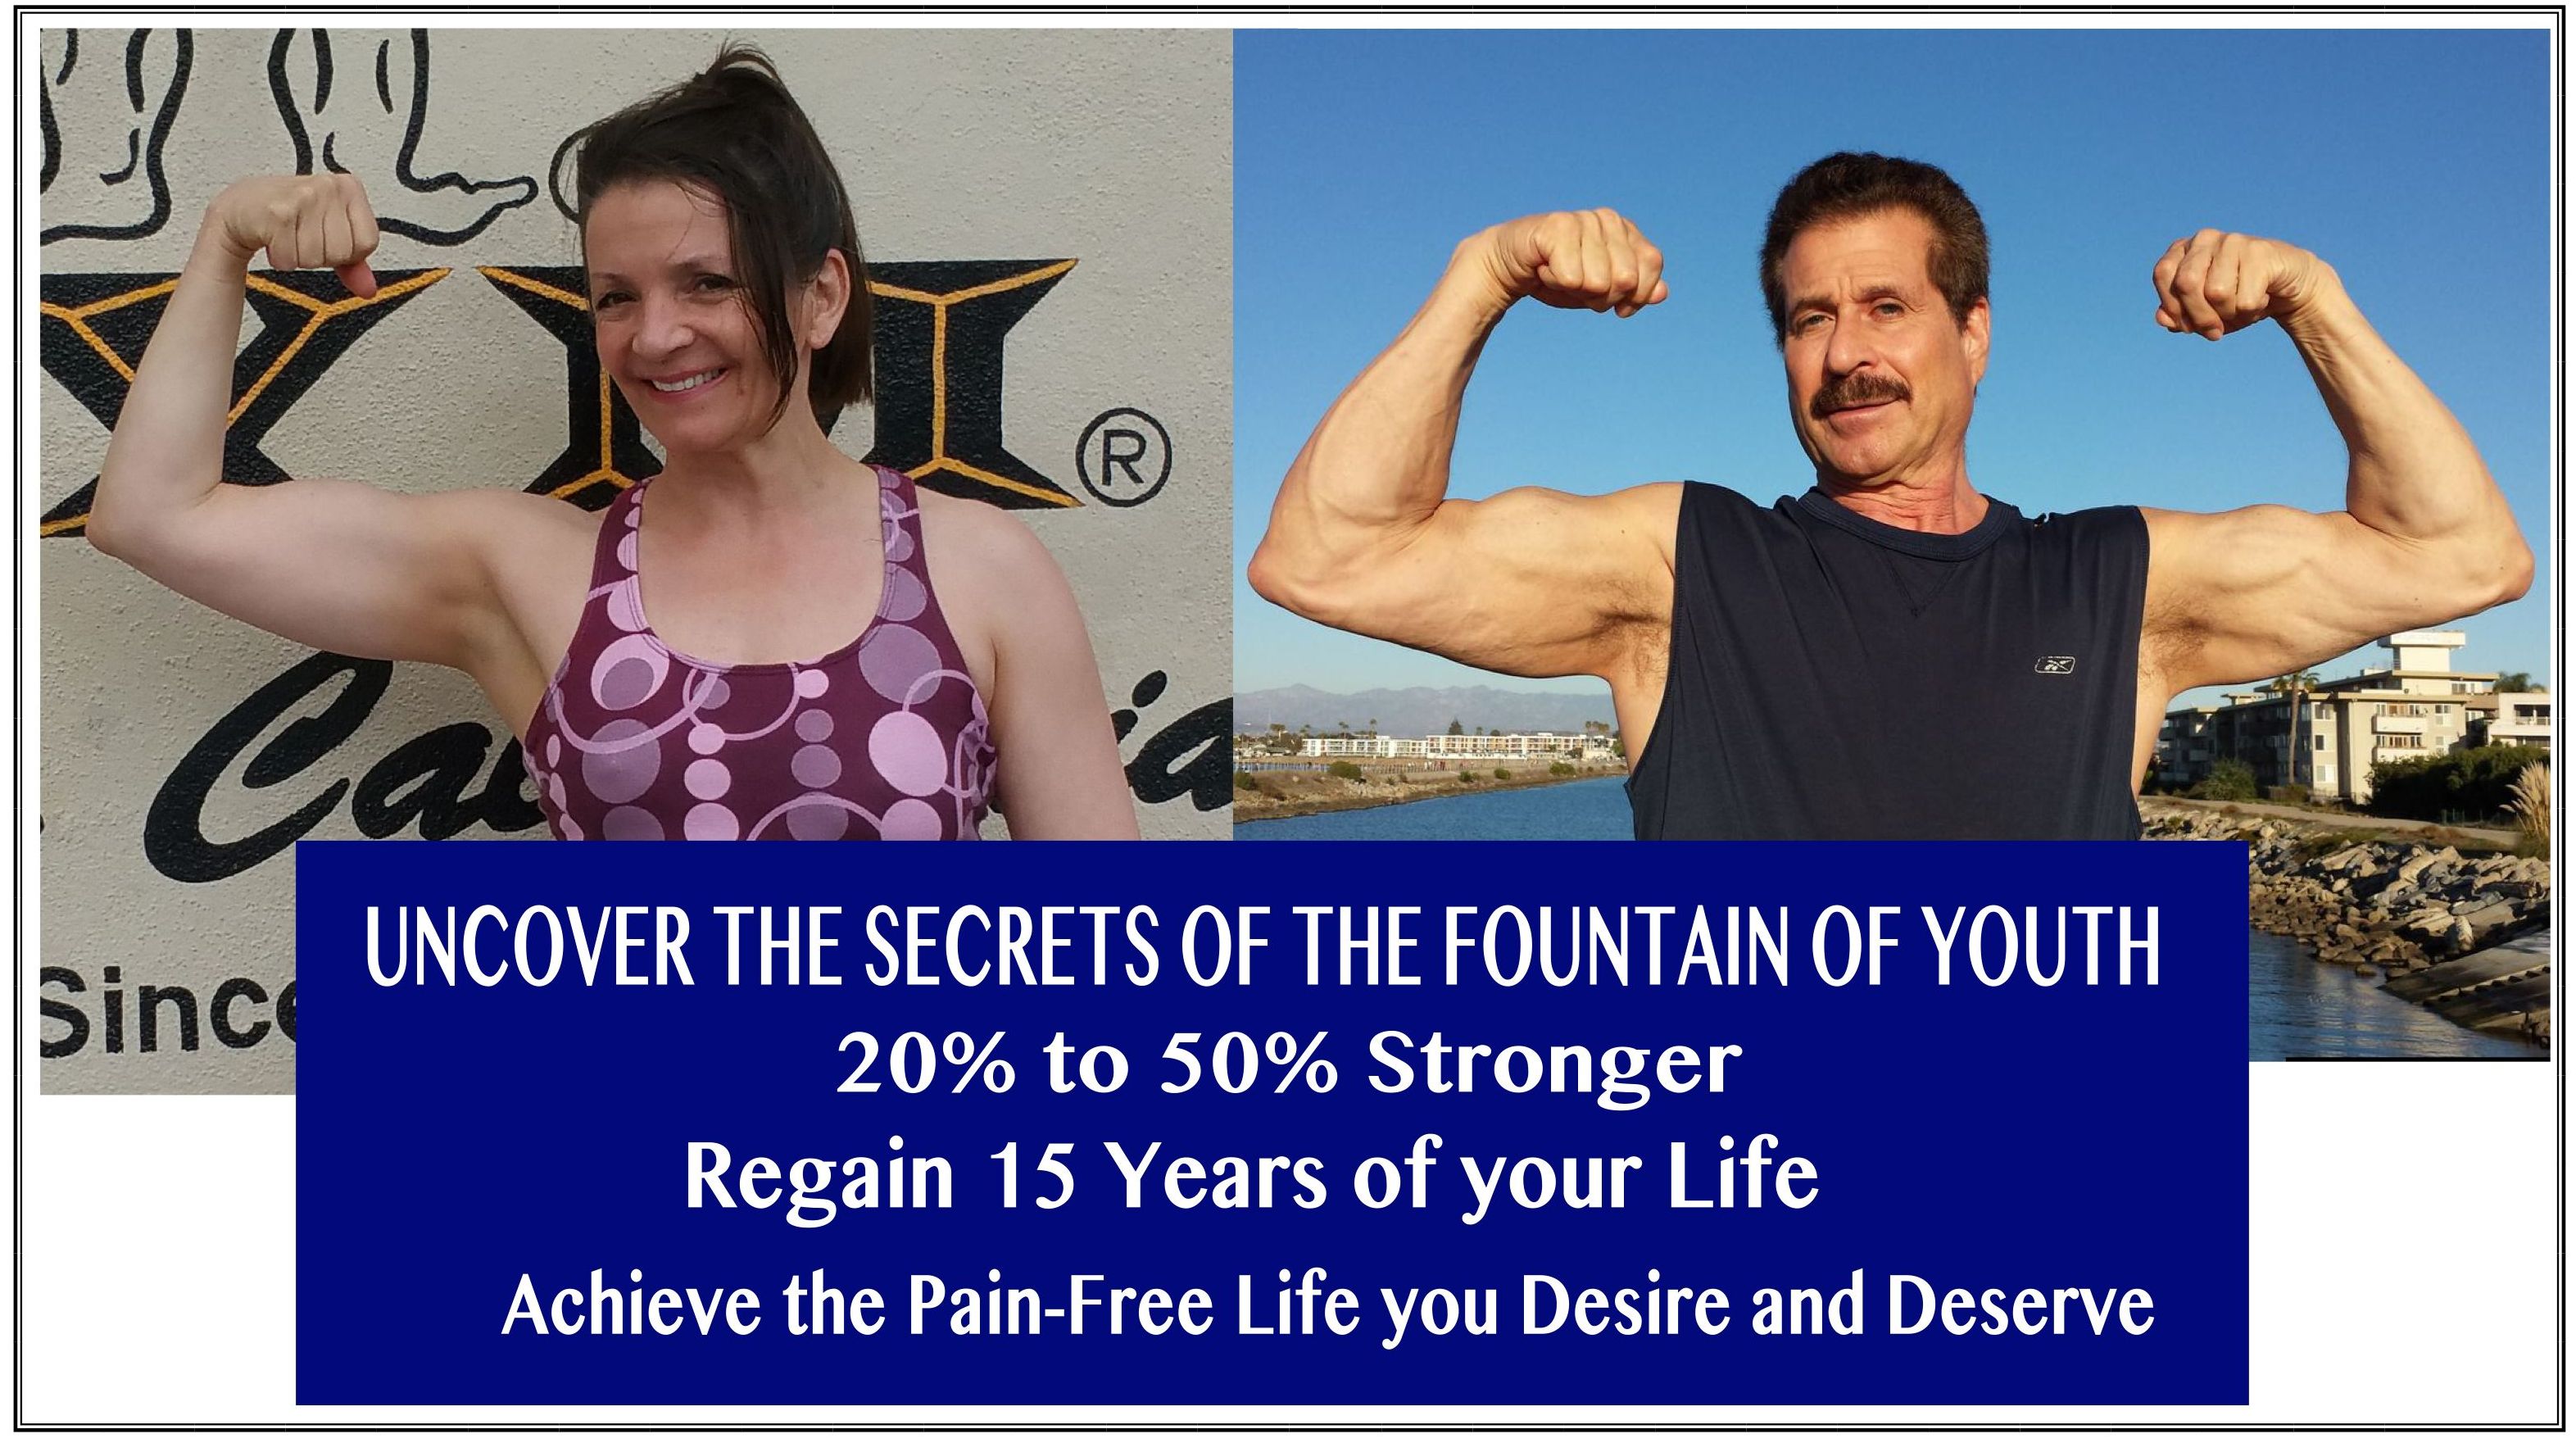 Dr. Fitness USA founders